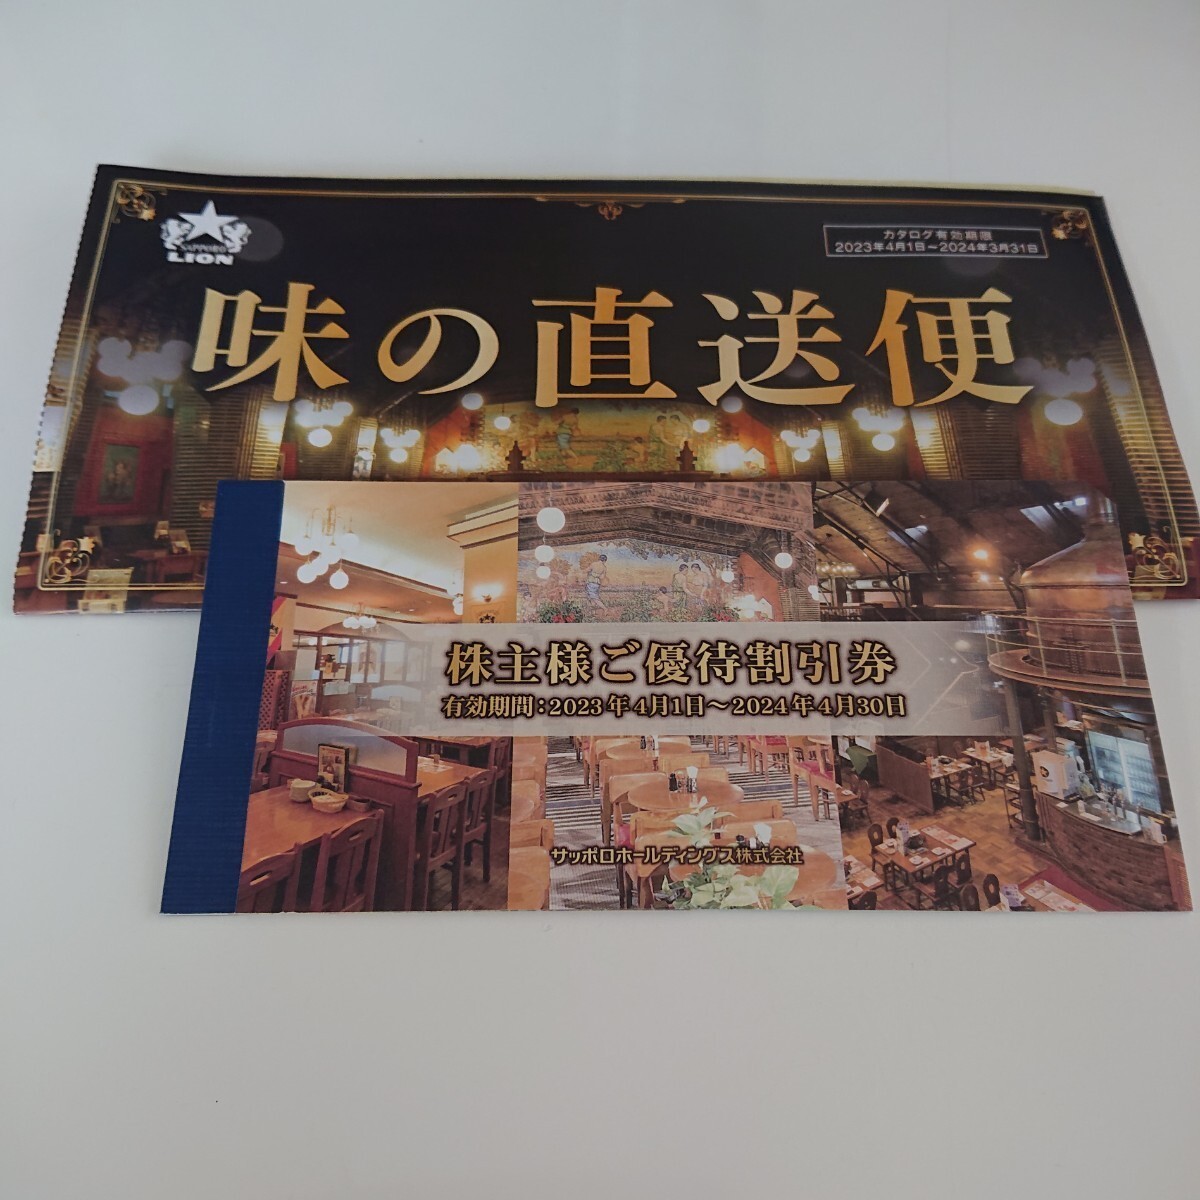 [ free shipping ] Sapporo holding s stockholder hospitality discount ticket 20% discount ×5 sheets [ Sapporo lion, taste. direct delivery flight ] have efficacy time limit 2025 year 4 month 30 until the day 